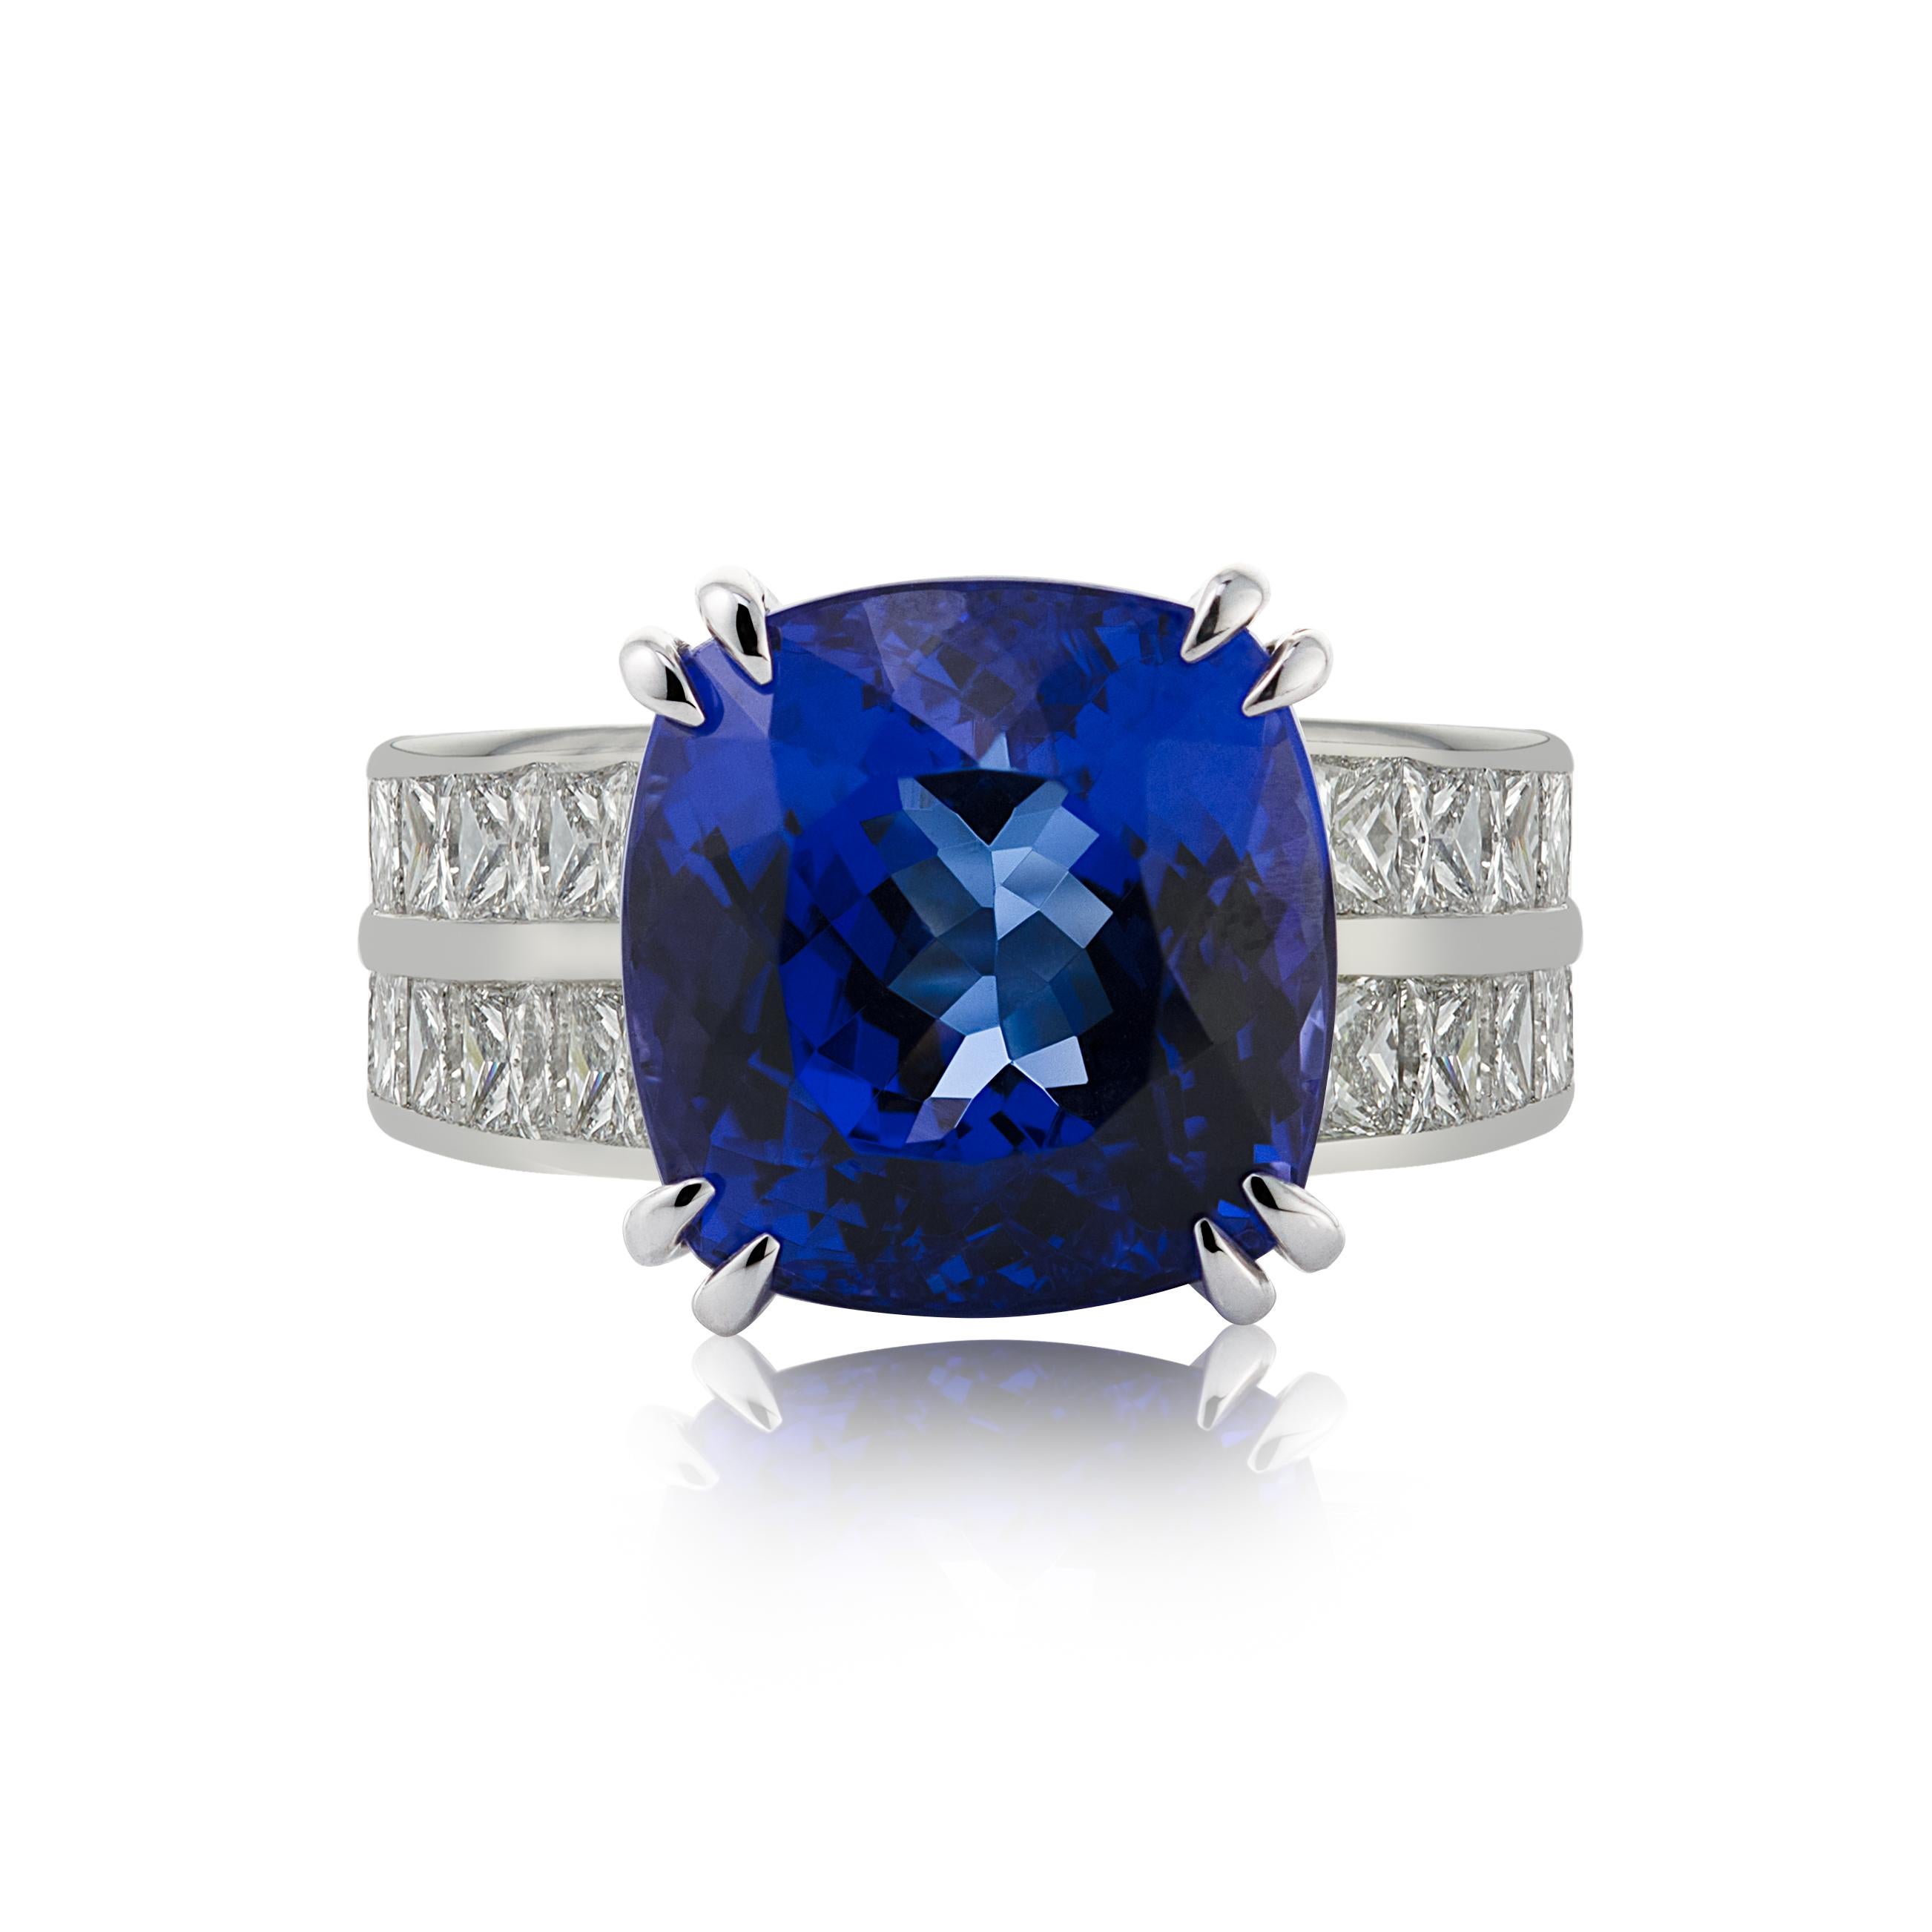 E Wolfe & Company Handmade 18 carat White Gold Tanzanite and Diamond Cocktail Ring. The tanzanite centre stone weighs 9 carats, is of extremely good colour and has two rows of princess-cut diamonds set to either side of the white gold ring band. The